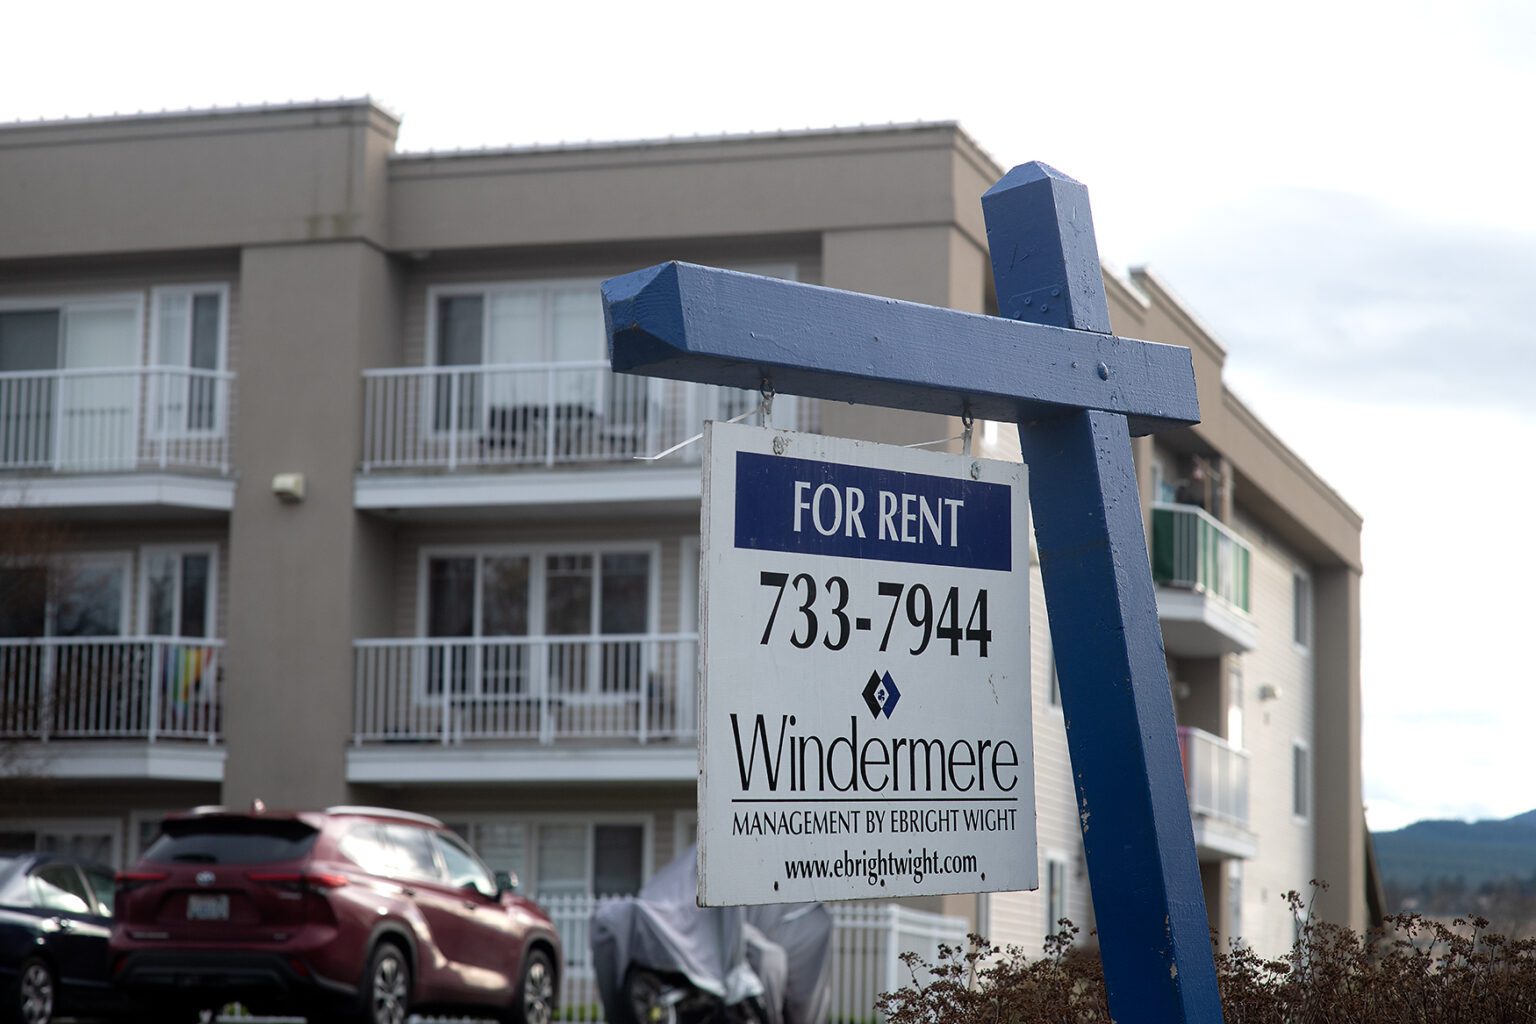 Rents went up an average of 70% in Whatcom County between 2015 and 2021